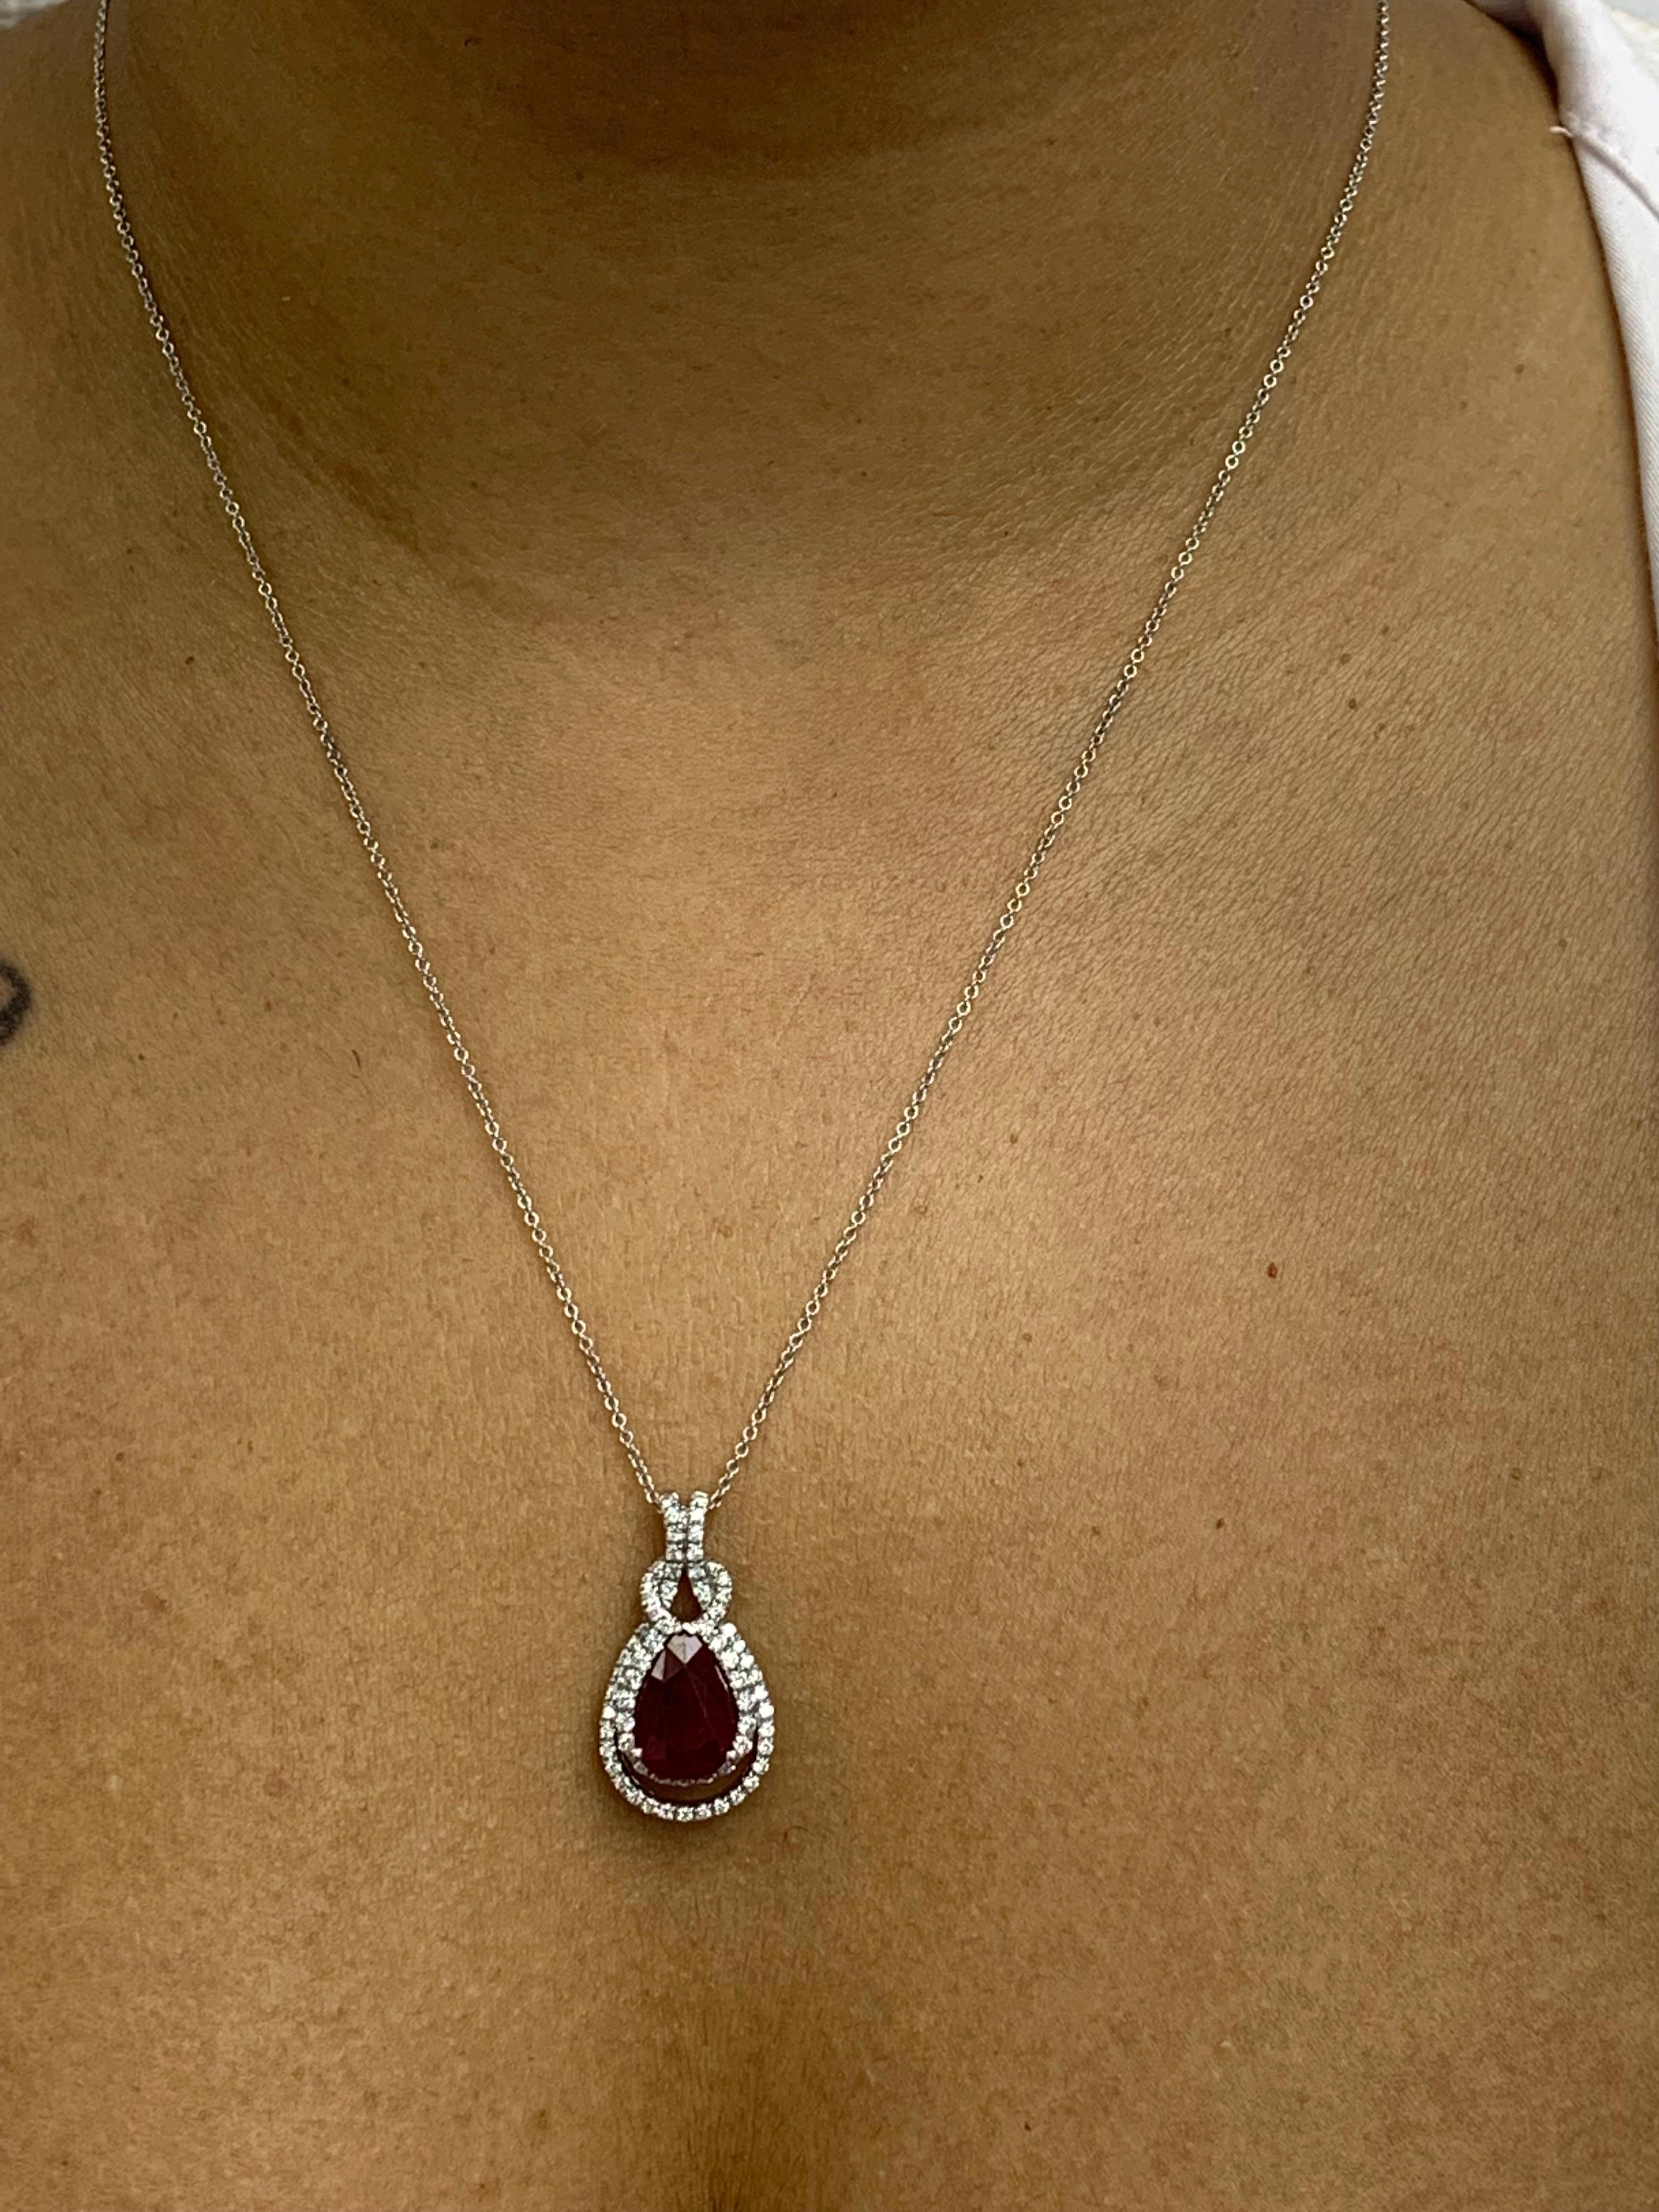 0.51 Carat Pear Shape Ruby and Diamond Drop Pendant in 18K White Gold For Sale 3